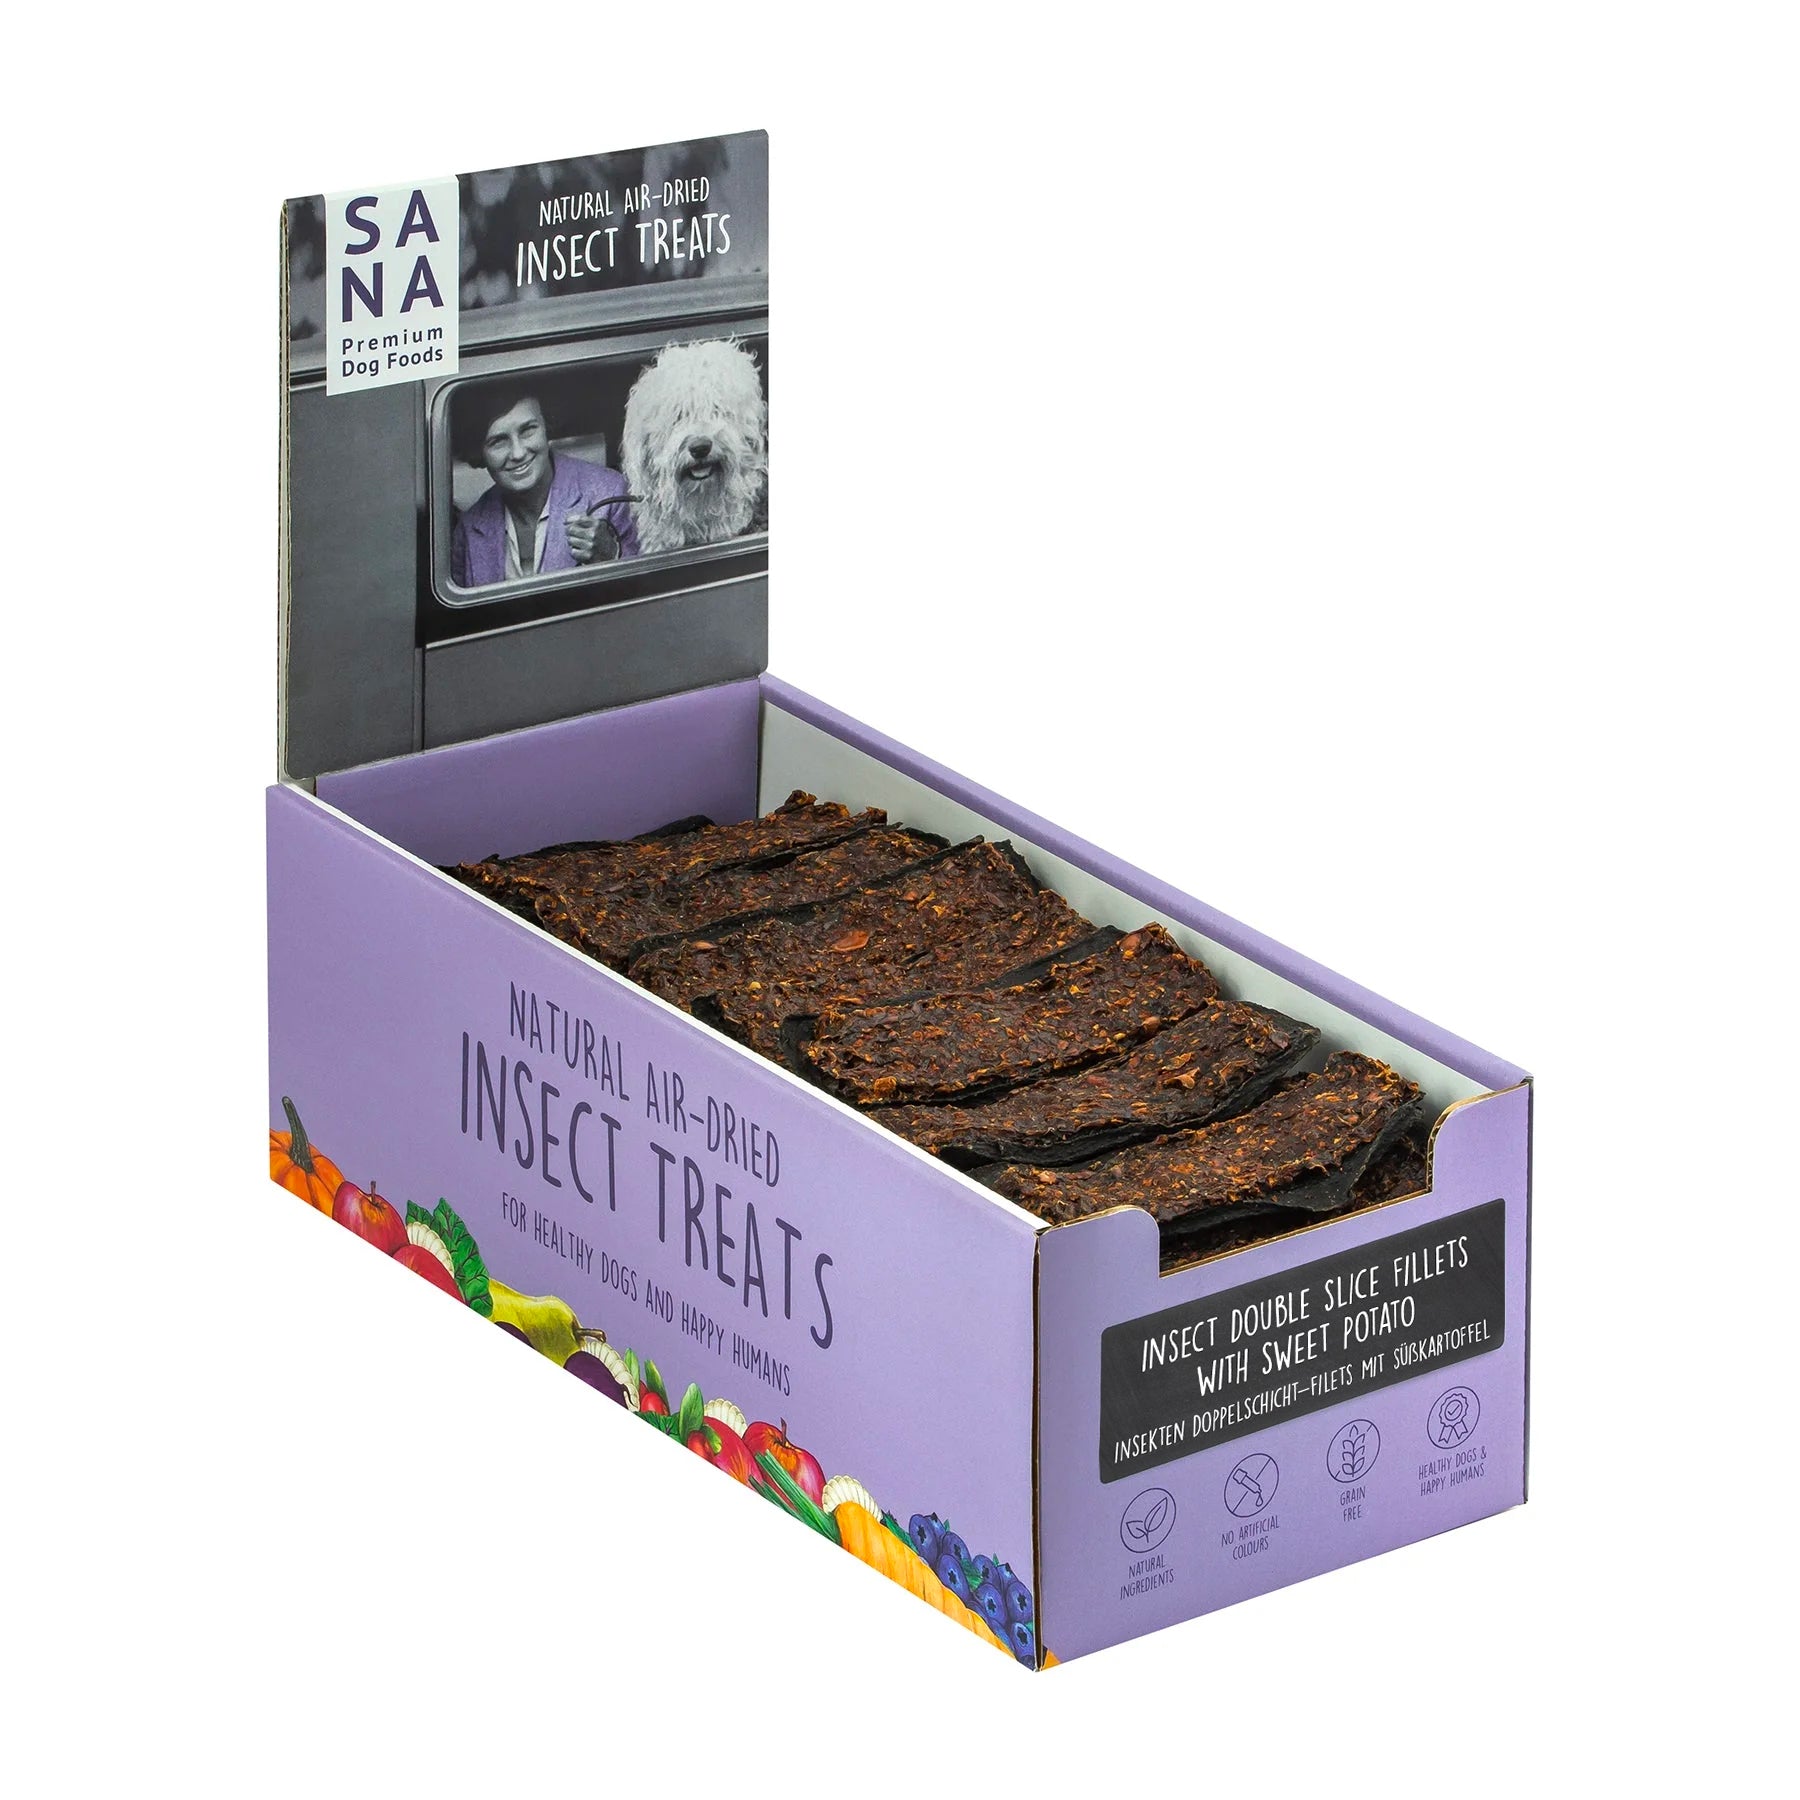 Insect Double Slice Fillets with Sweet Potato (approx. 1200g) in printable display